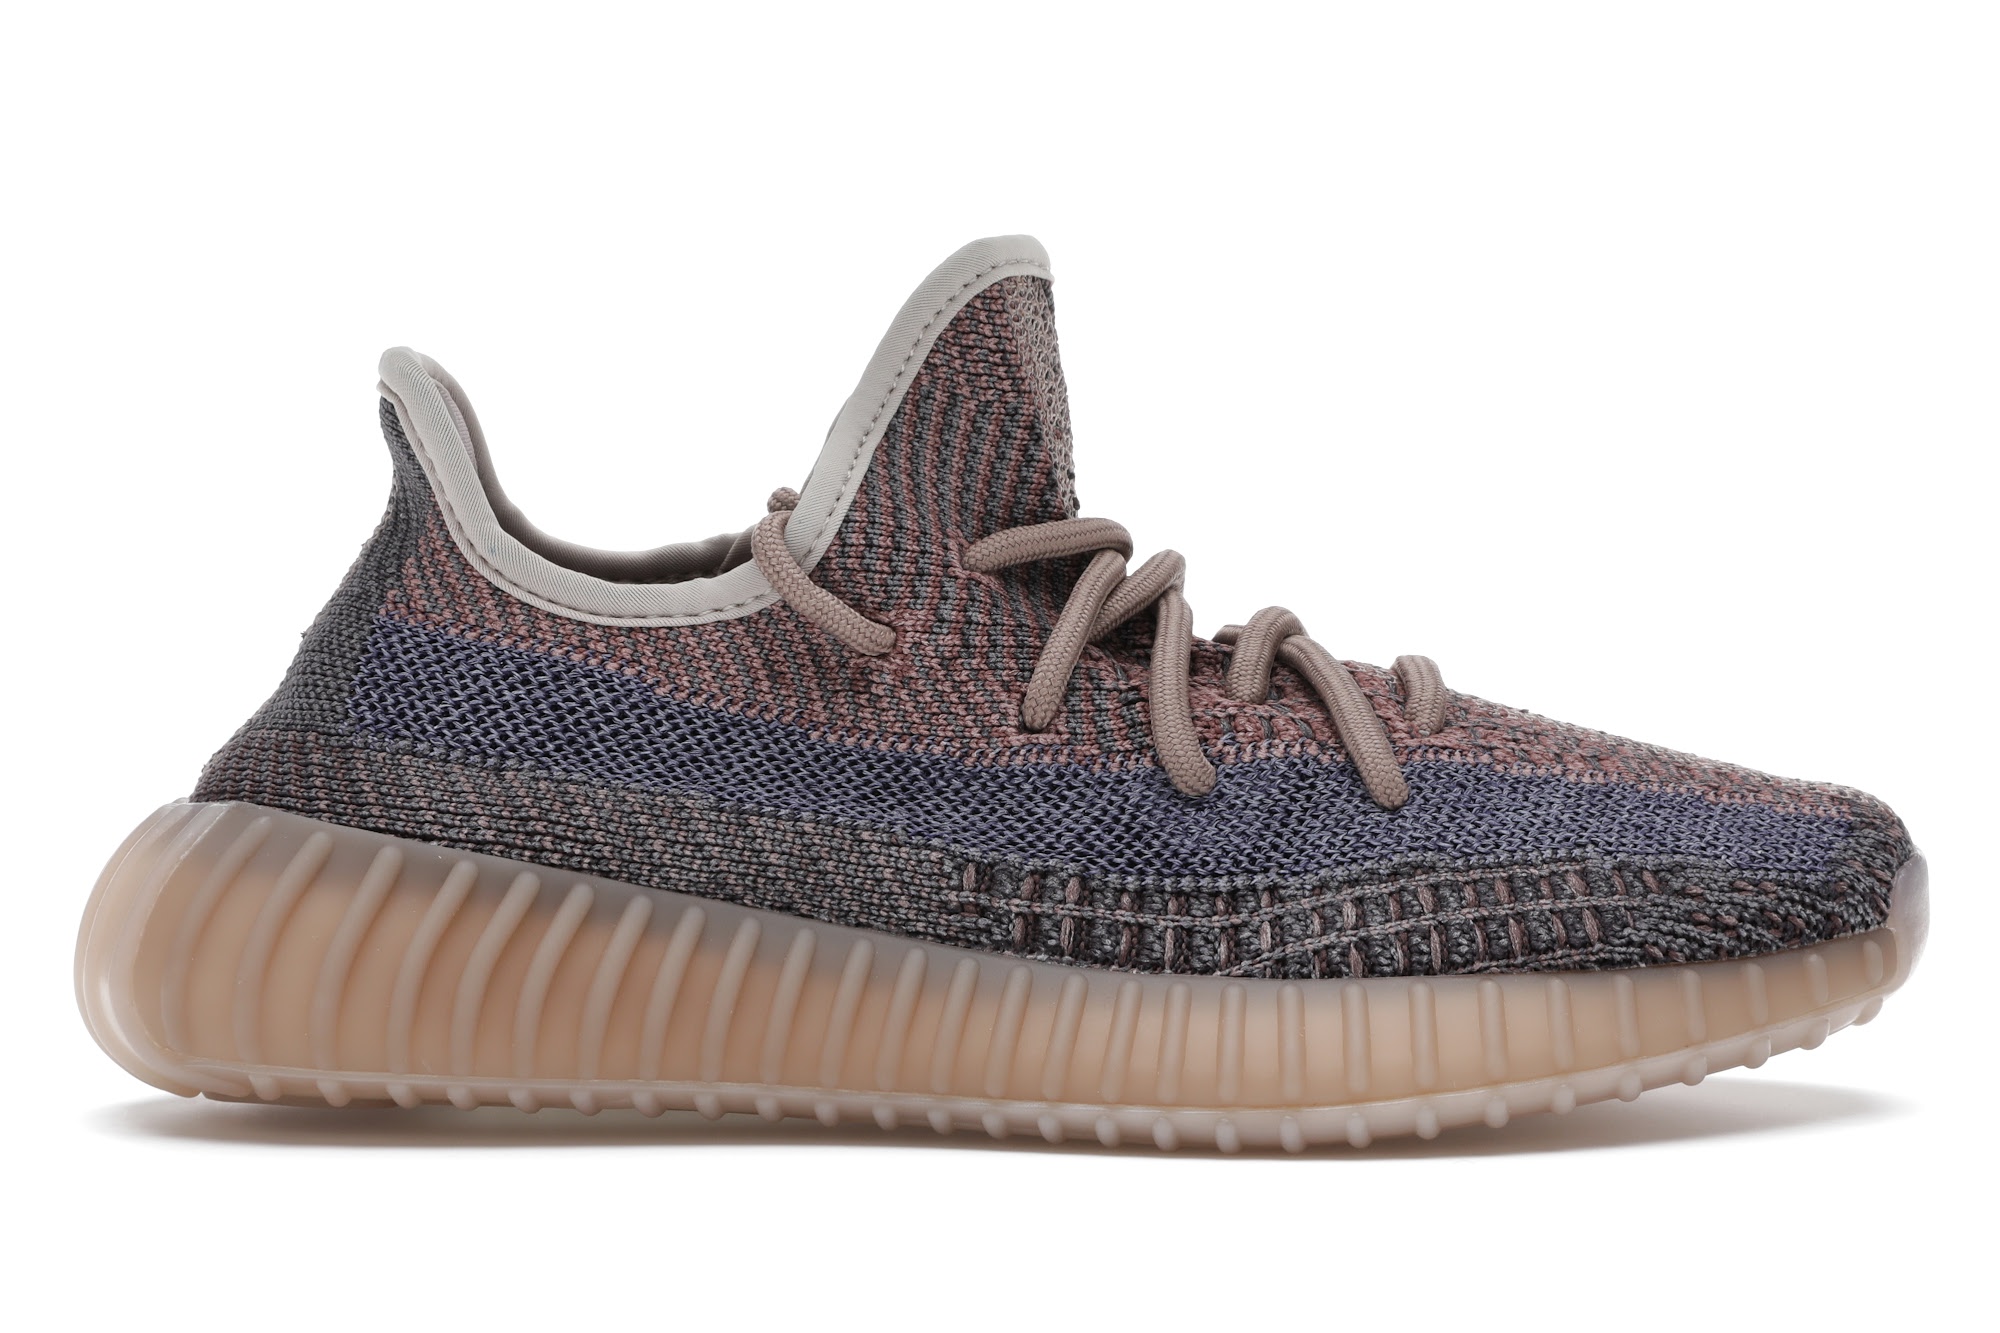 adidas Yeezy Boost 350 V2 Fade Men's - H02795 - US